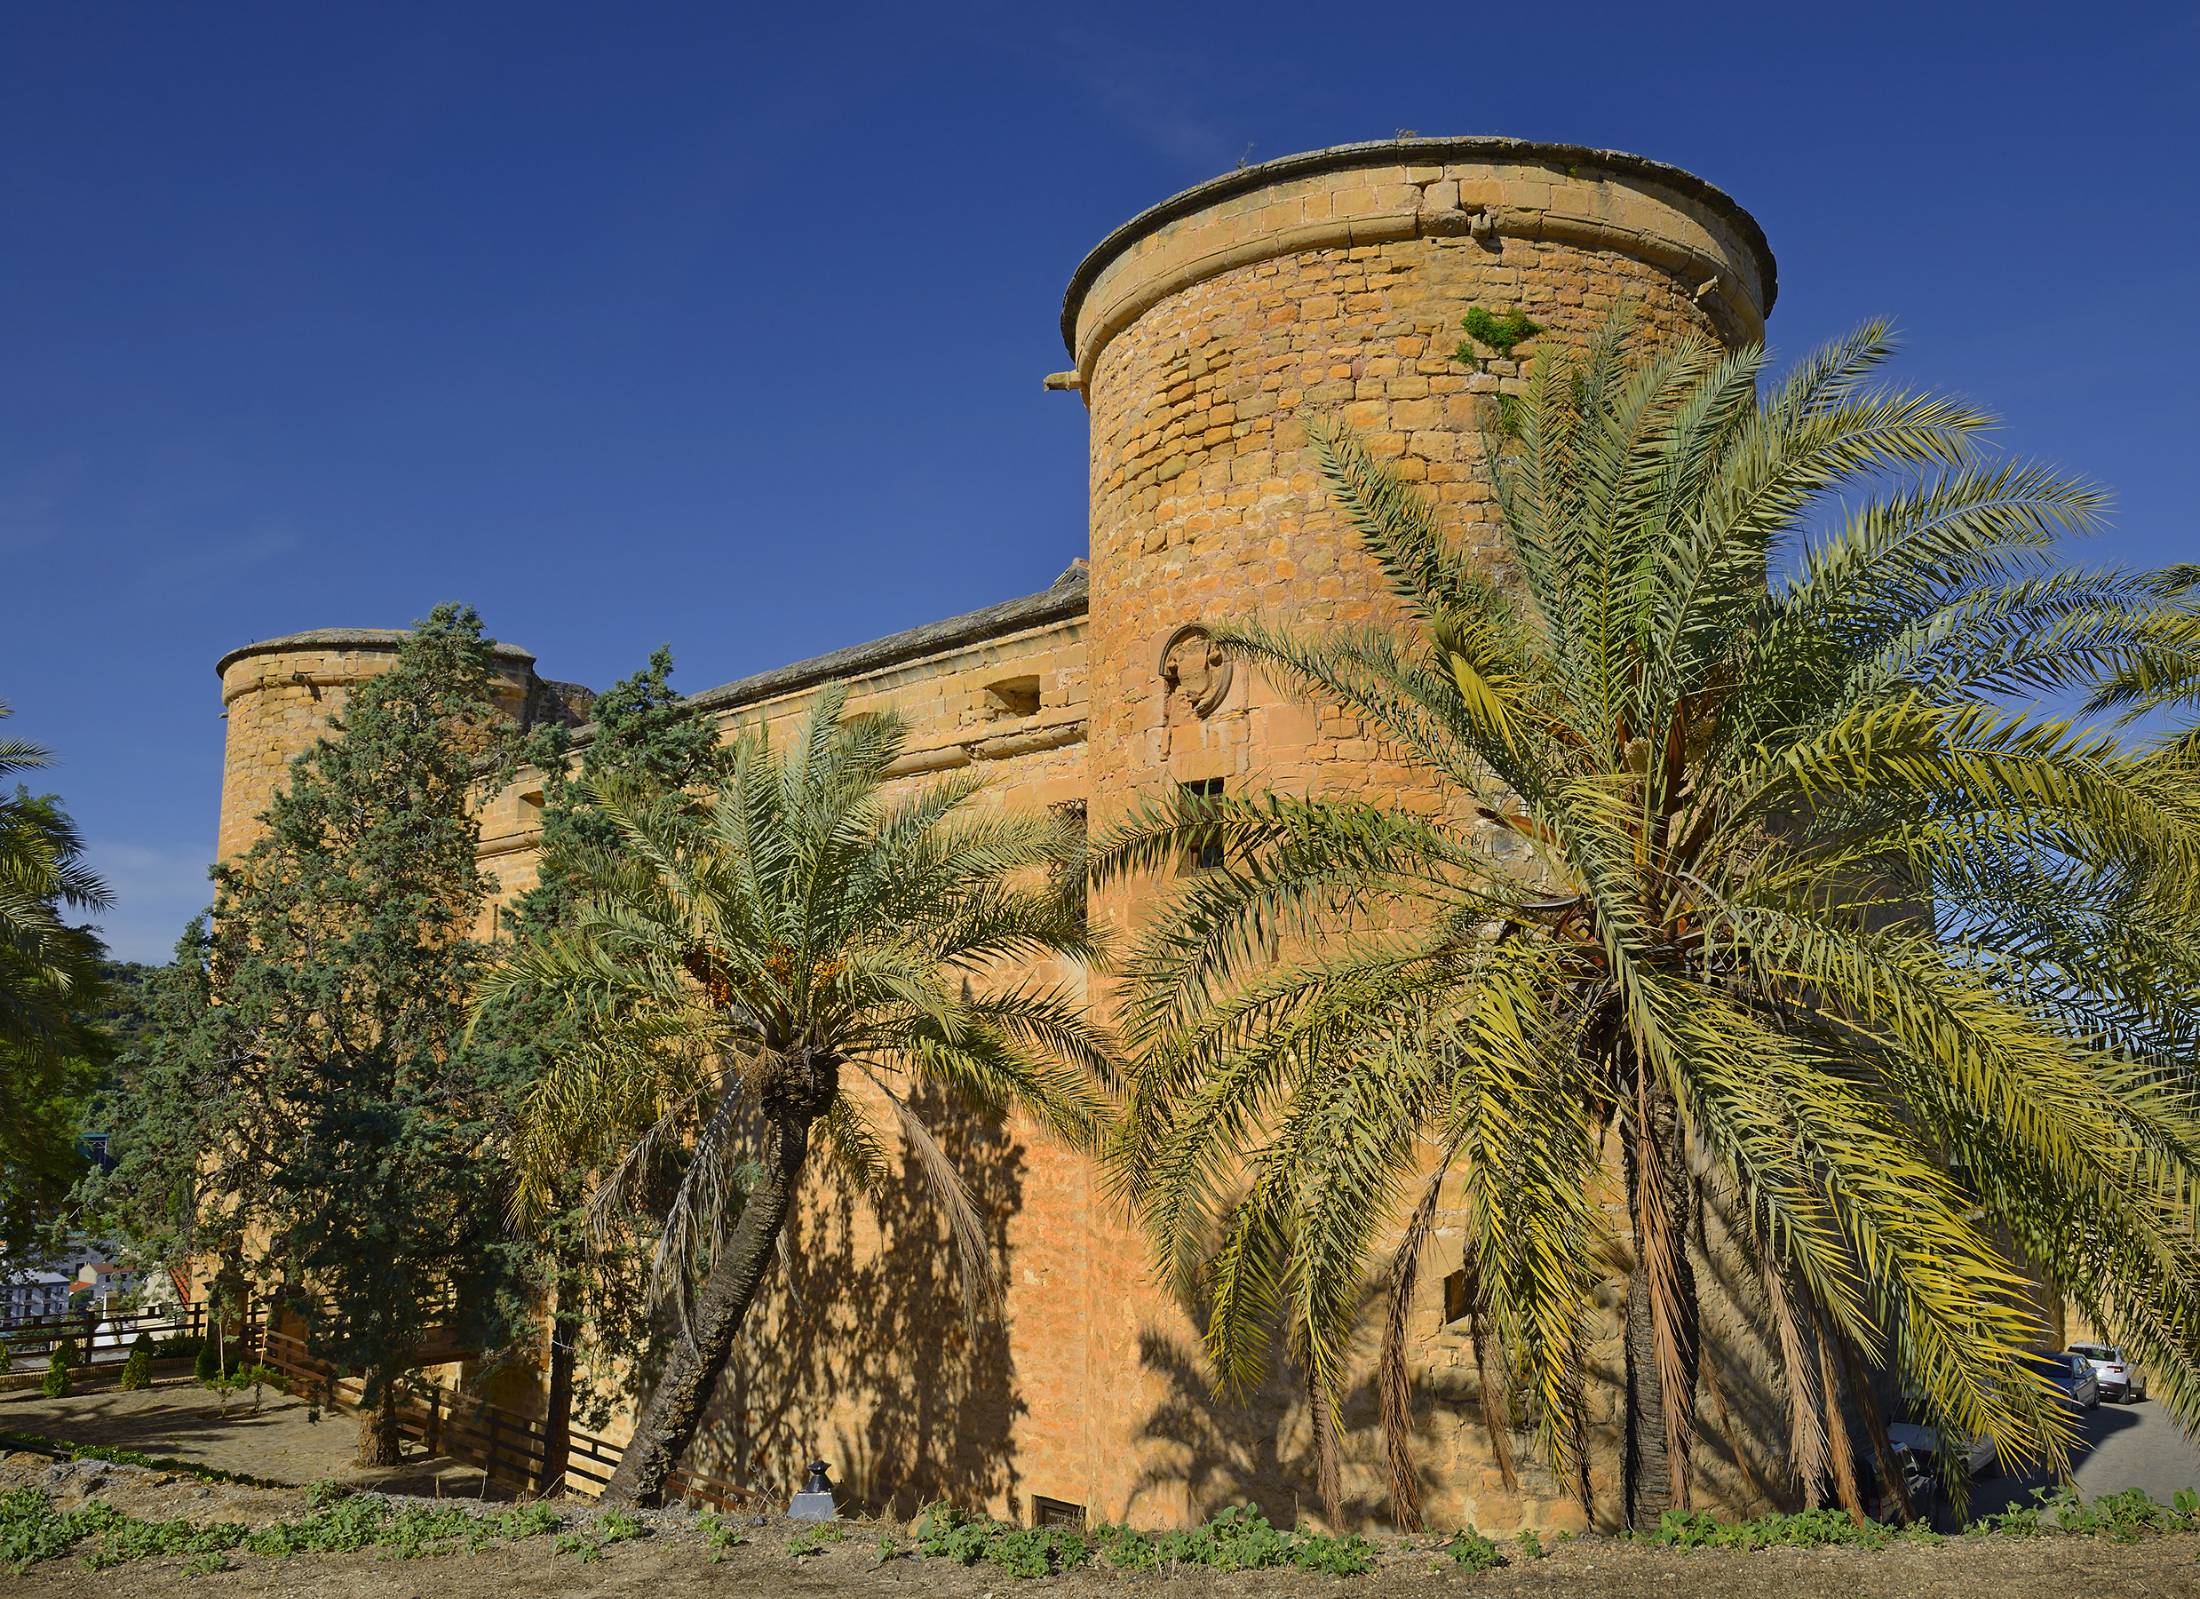 <p><span>The Campo de Castillo de
Canena, where its olive groves grow, is located in the municipality of Ubeda in
Jaén, bordering the Sierra de Cazorla in the heart of the upper Guadalquivir
Valley.</span><br /></p>